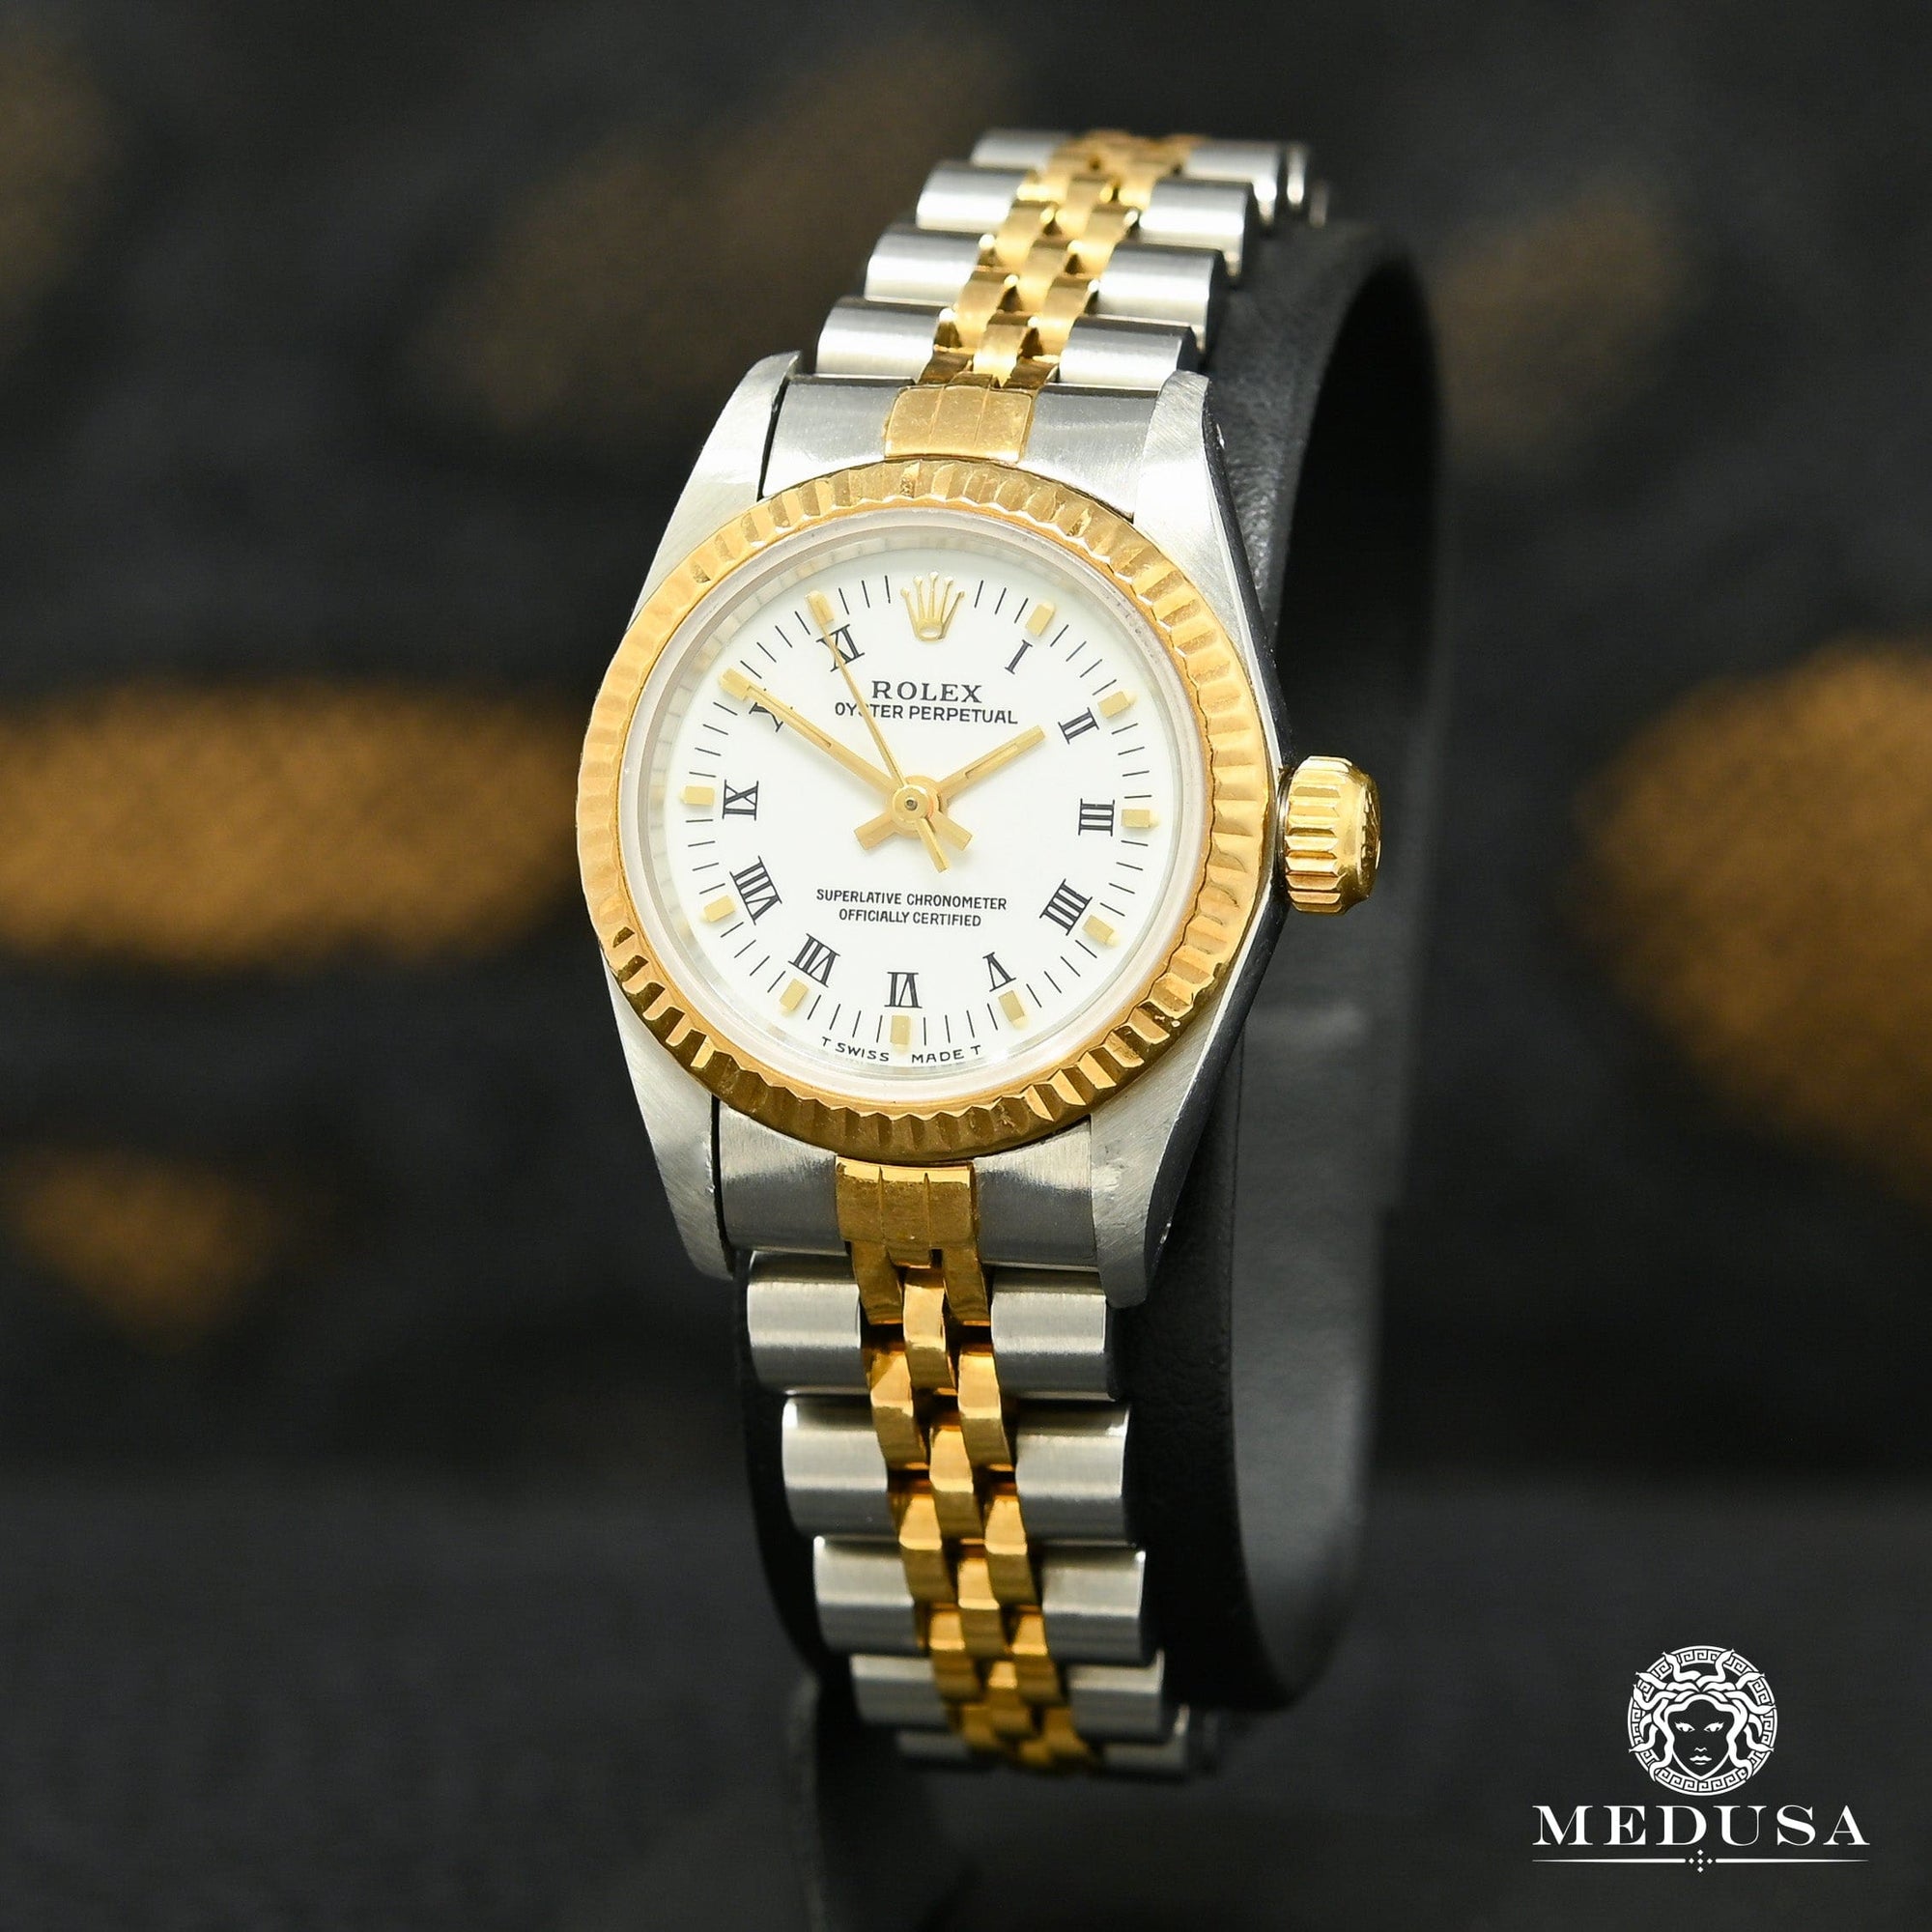 Montre Rolex | Montre Femme Rolex Oyster Perpetual 26mm - White Or 2 Tons